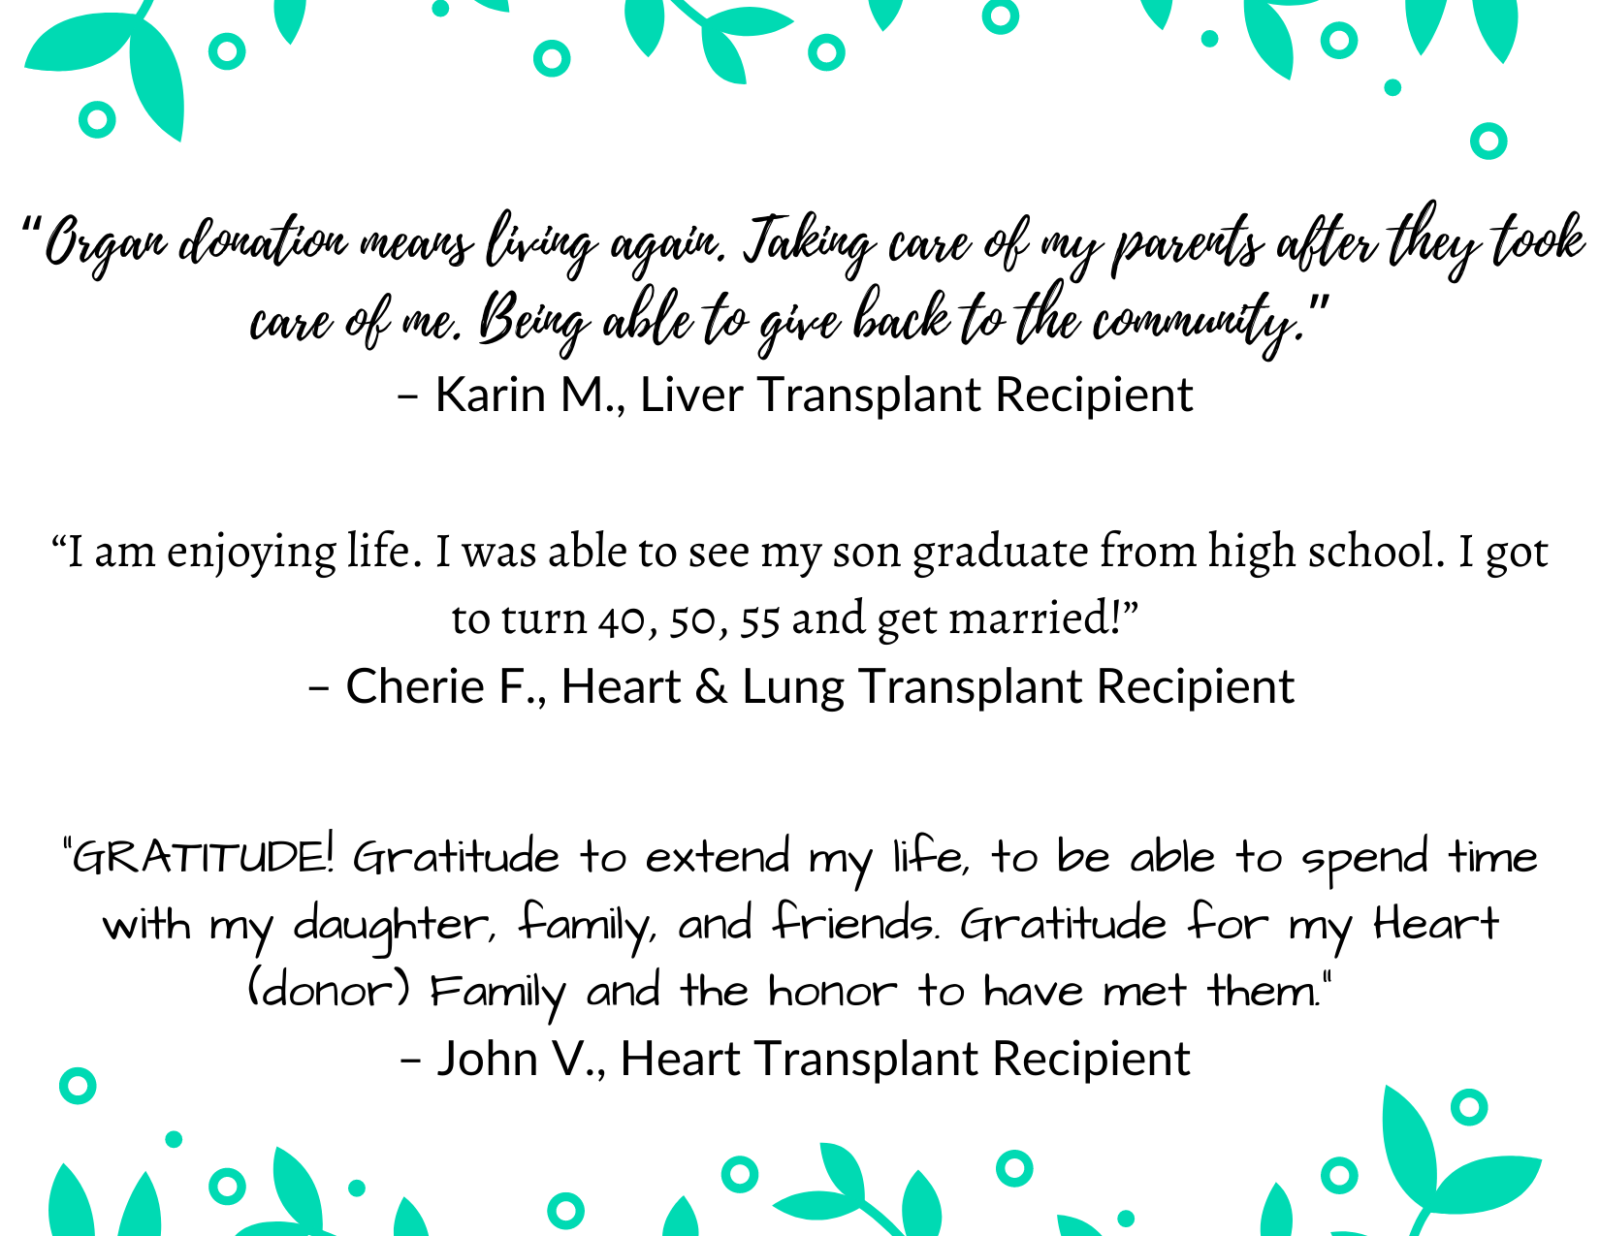 Quotes from transplant recipients